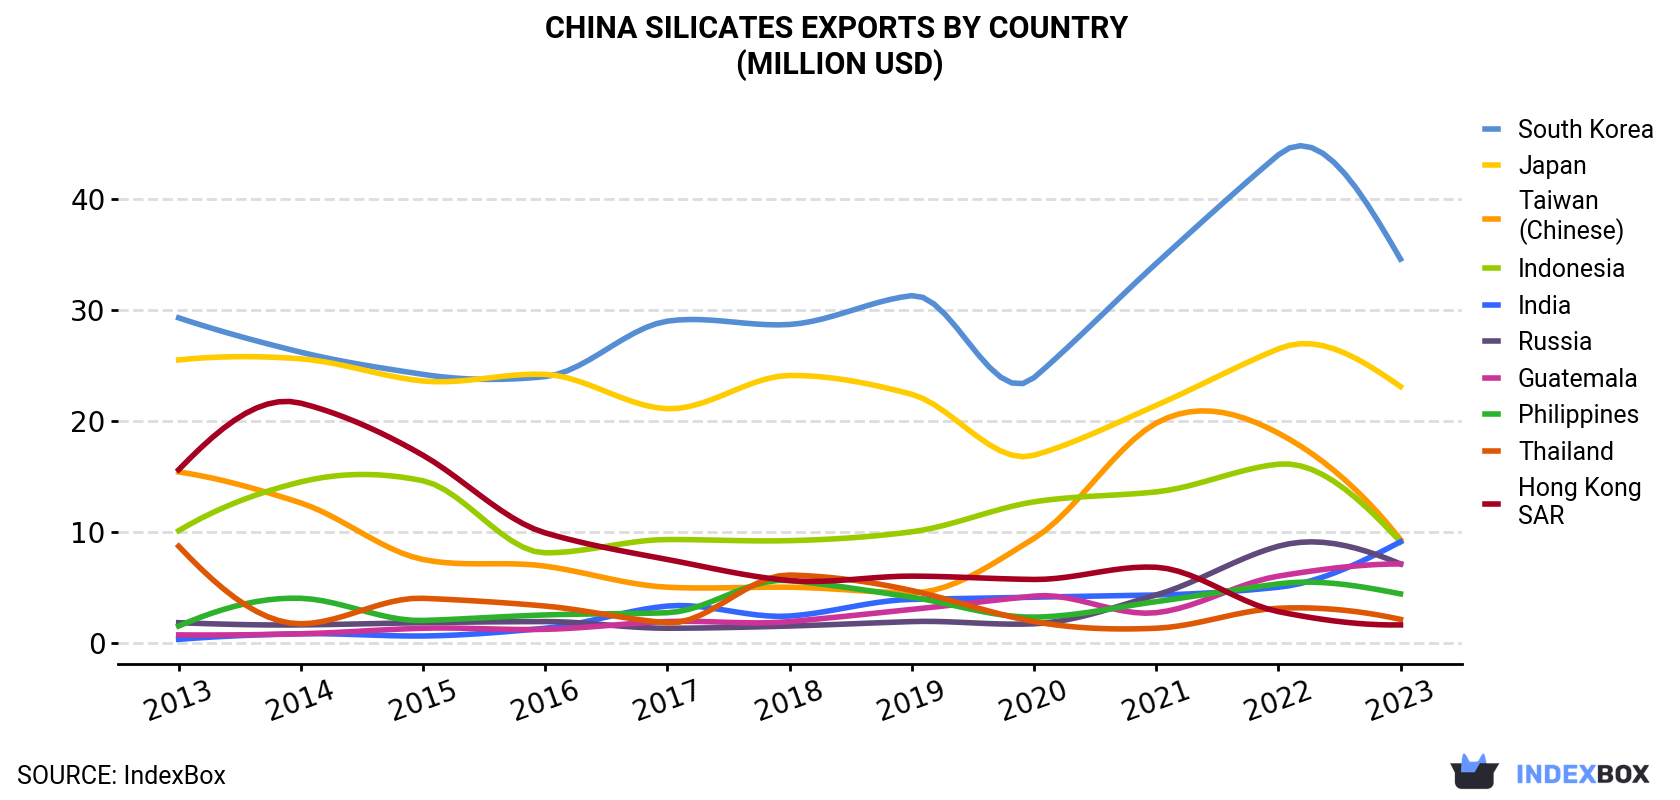 China Silicates Exports By Country (Million USD)